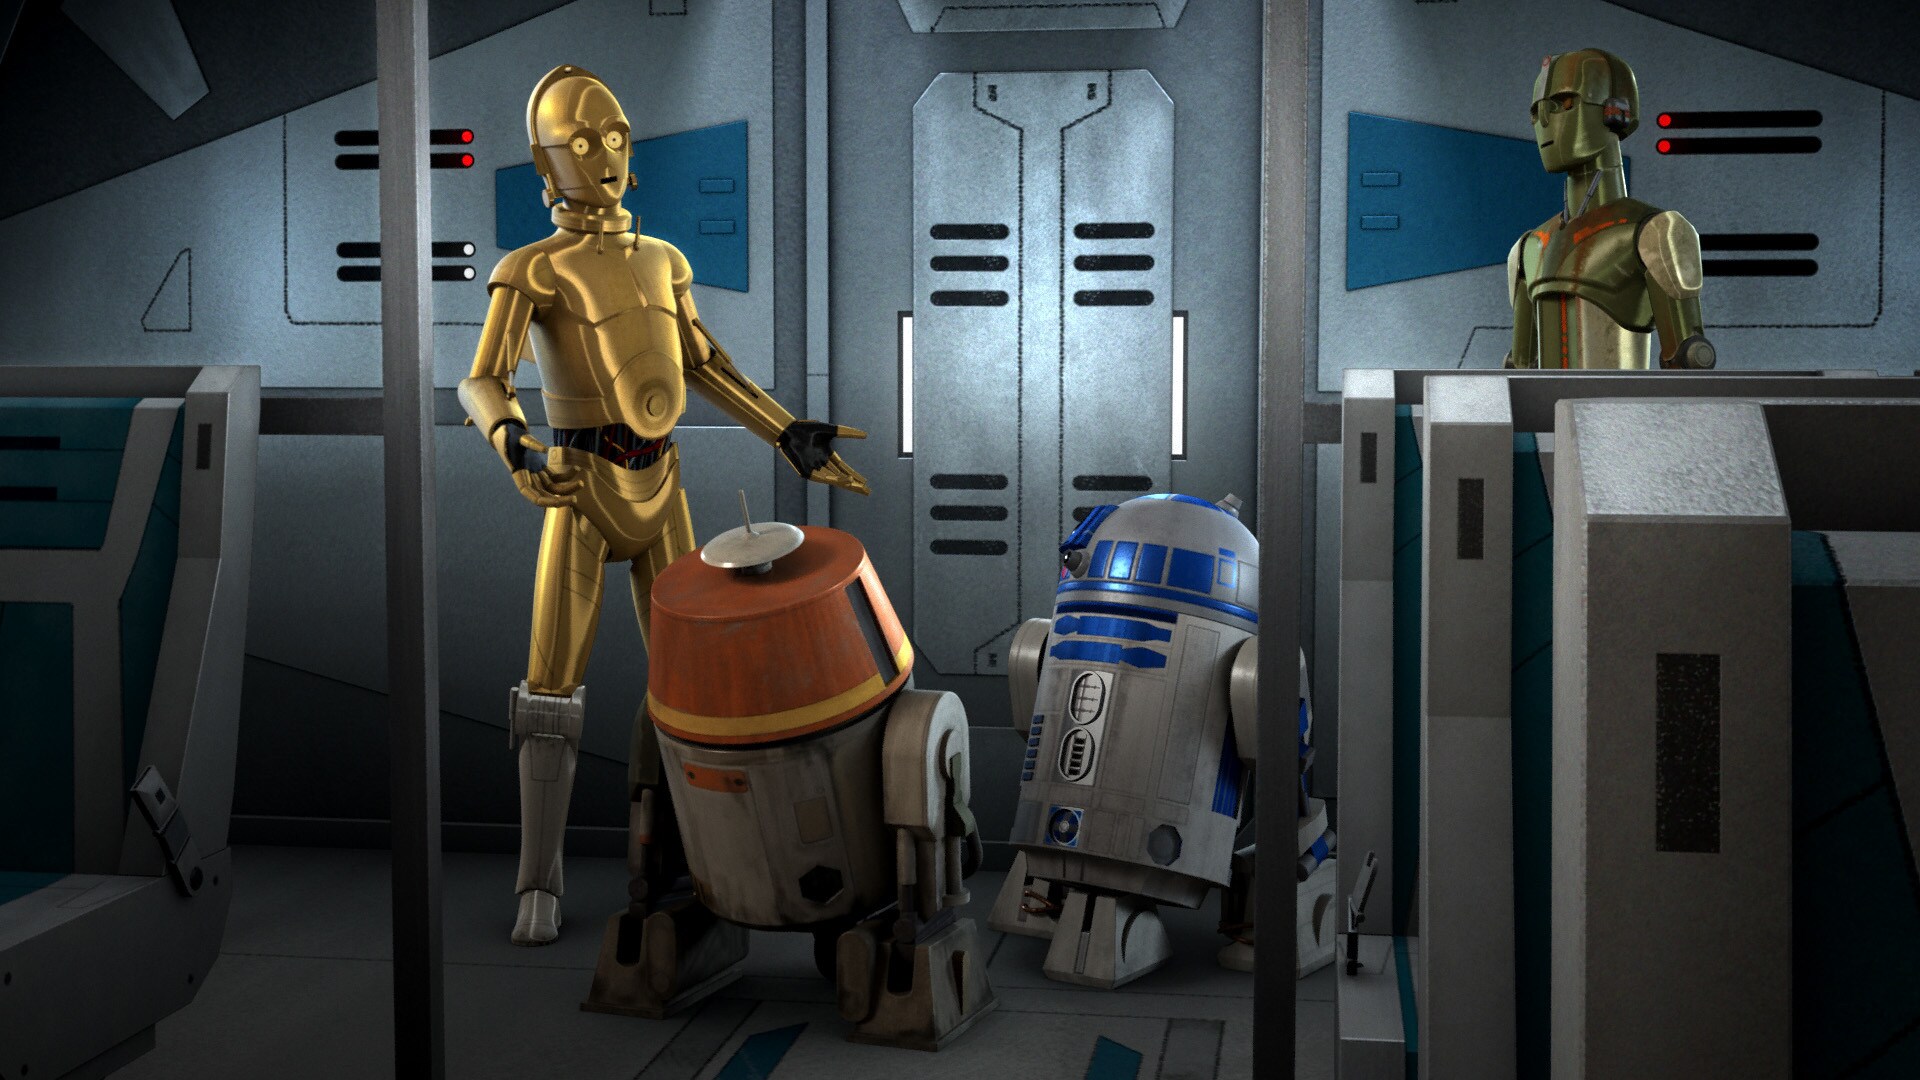 C-3PO claims that this development may upset their true mission, which causes R2-D2 to quickly sh...